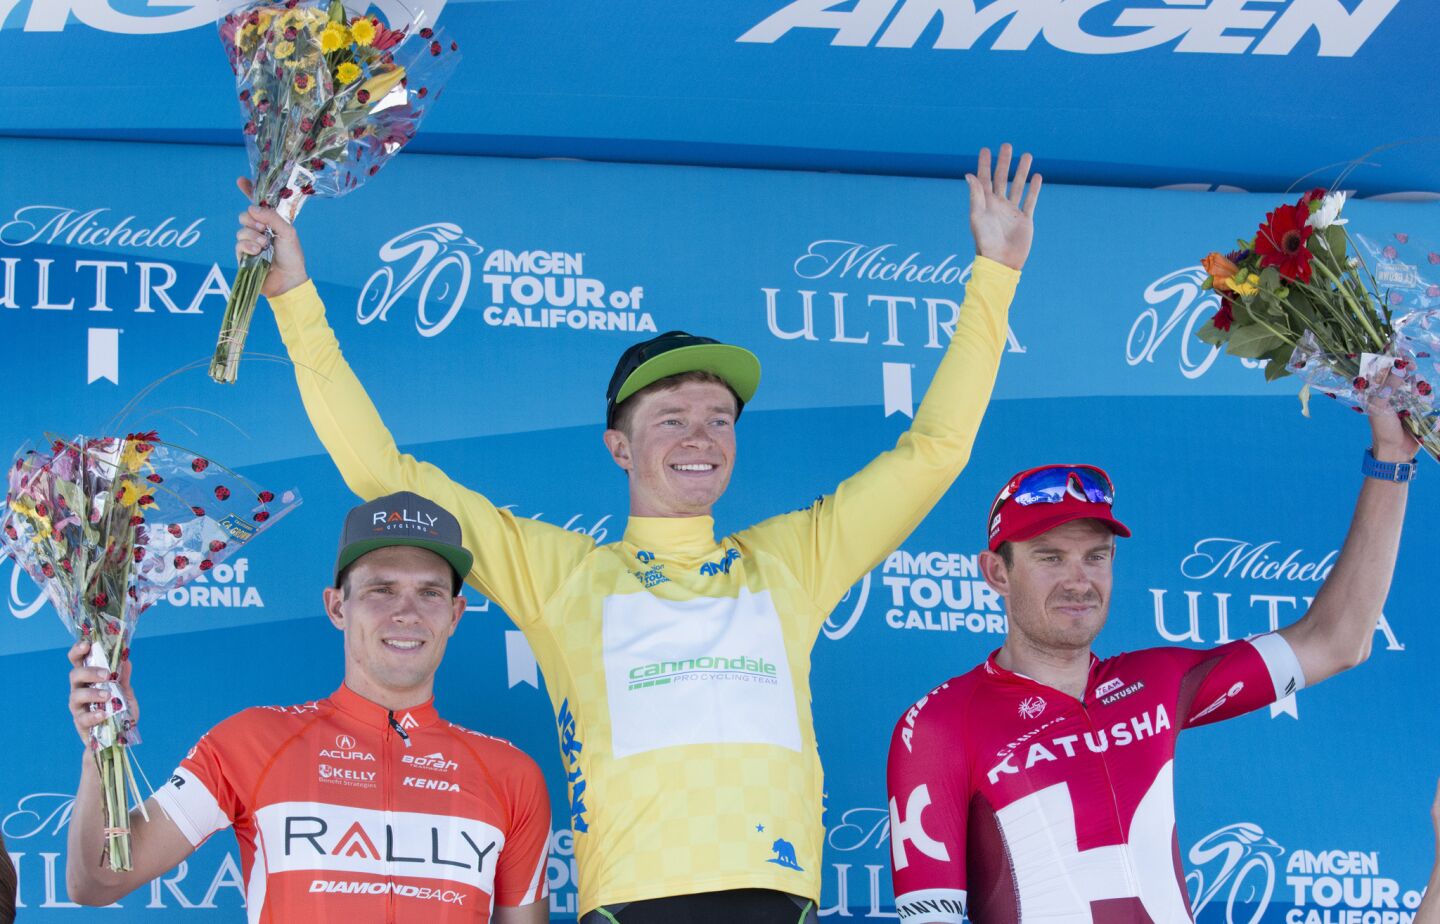 Ben King, Amgen Tour of California stage 2 winner, stands between second-place finisher Evan Huffman, left, and third-place finisher Alexander Kristoff during the podium presentation in Santa Clarita on May 16.